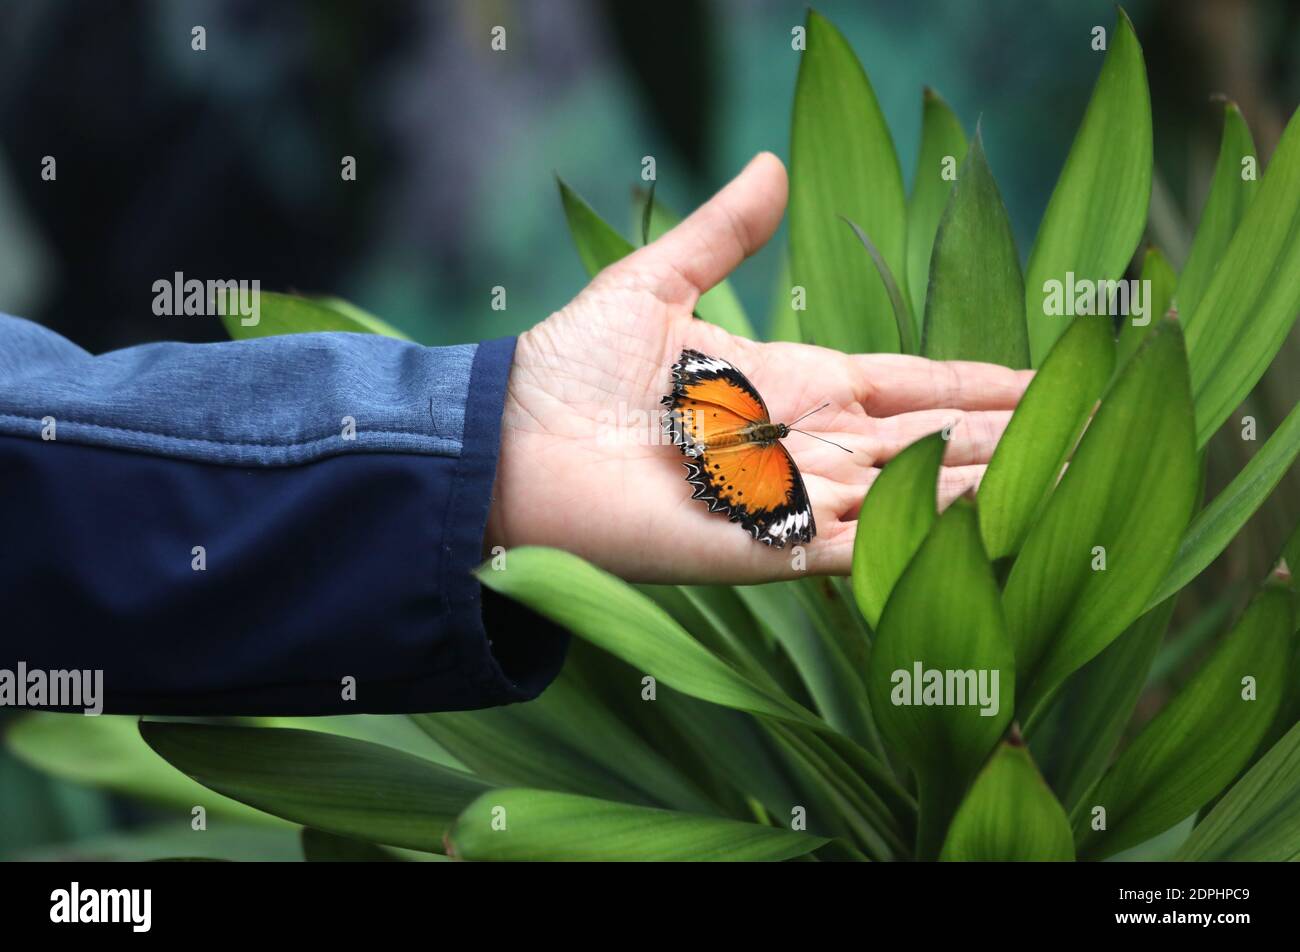 Big Butterfly In The Hand Of The Boy In The Jungle Stock Photo